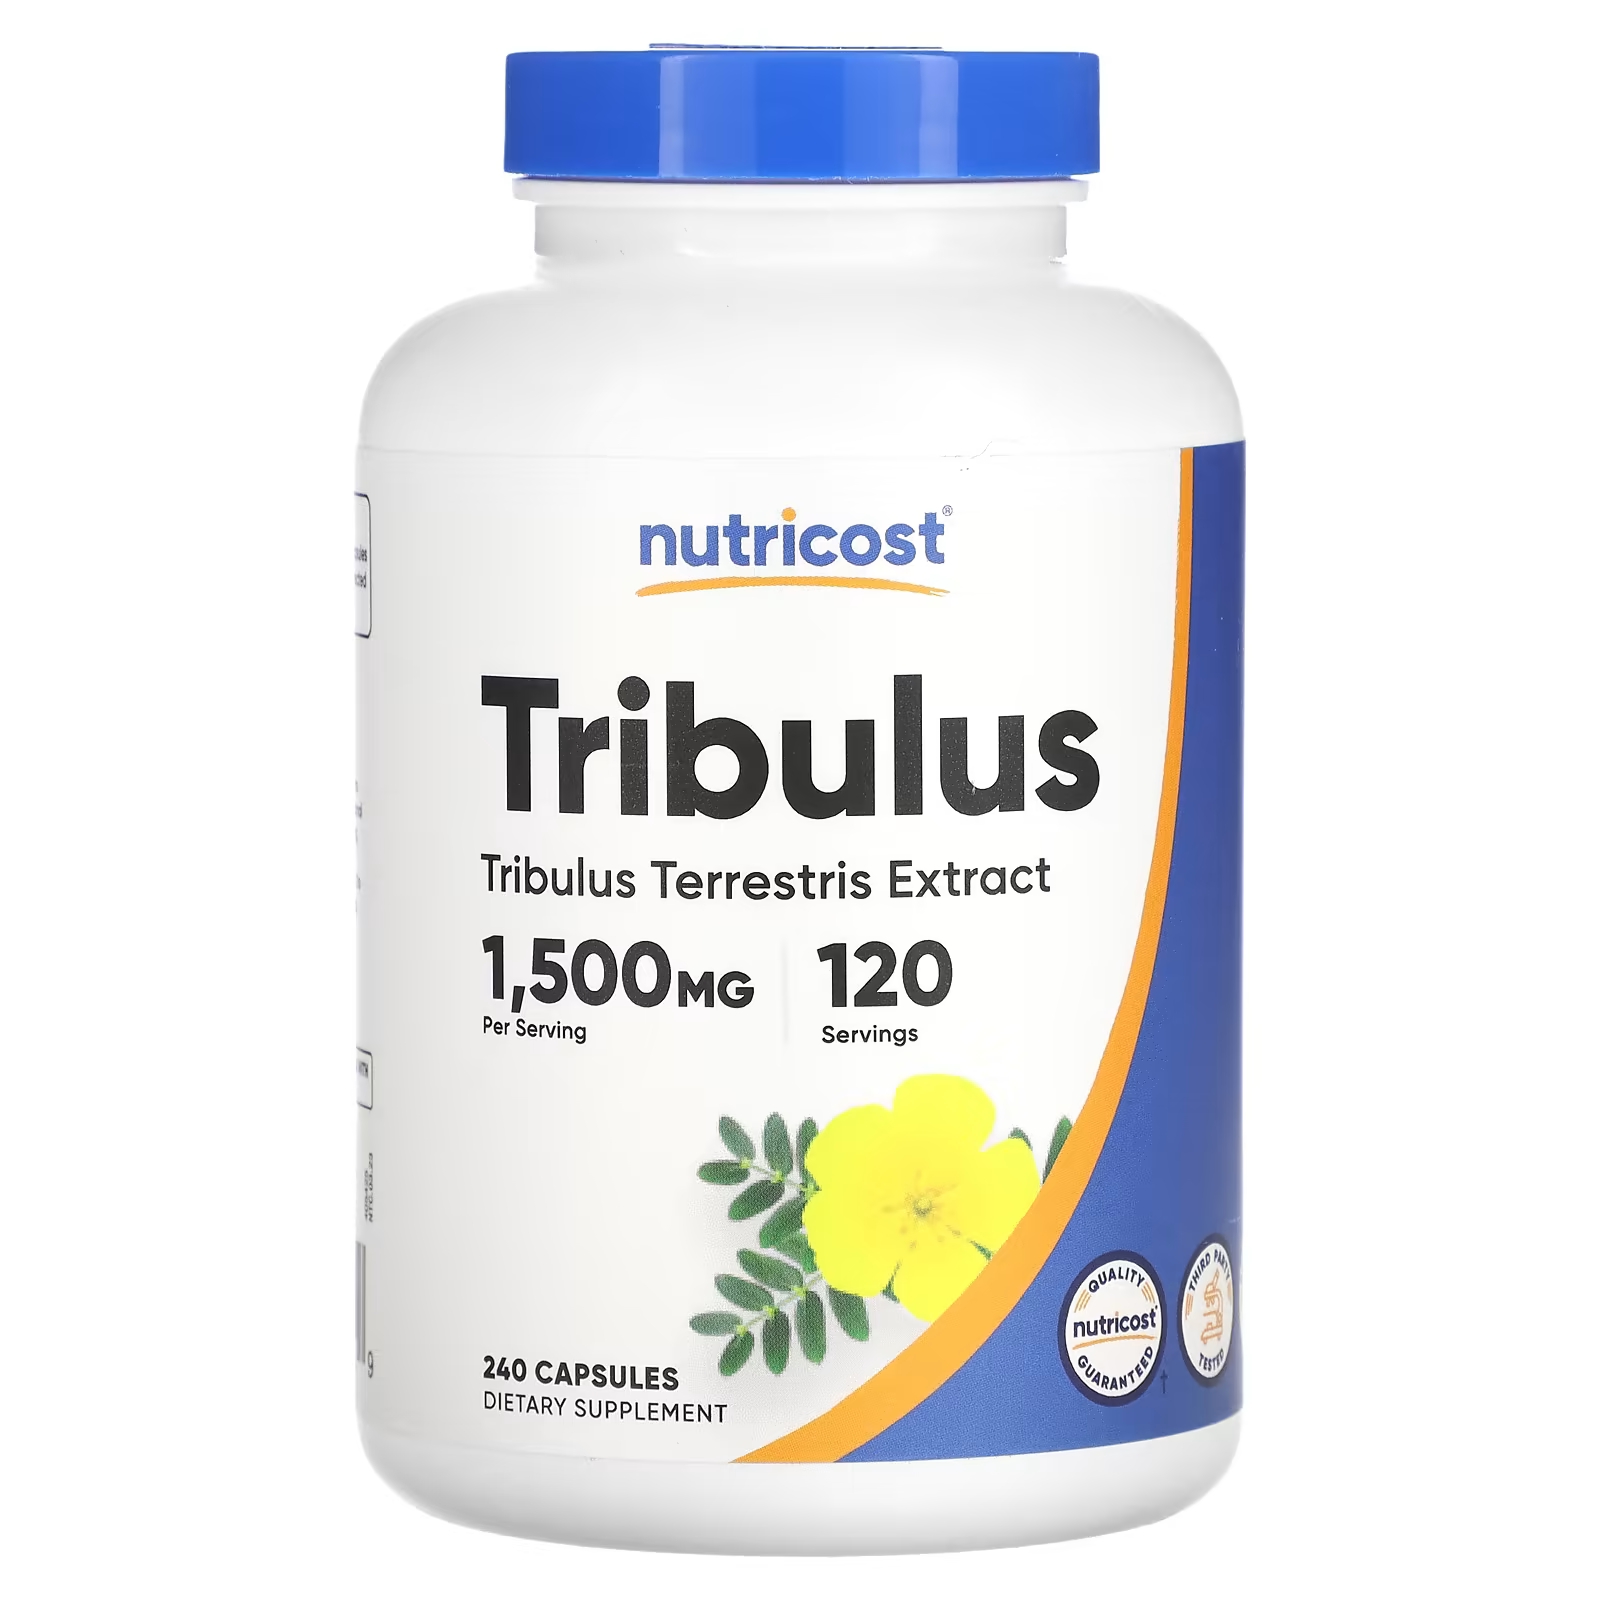 Nutricost Tribulus 1500 мг 240 капсул (750 мг на капсулу) nutricost tribulus 1500 мг 120 капсул 750 мг на капсулу